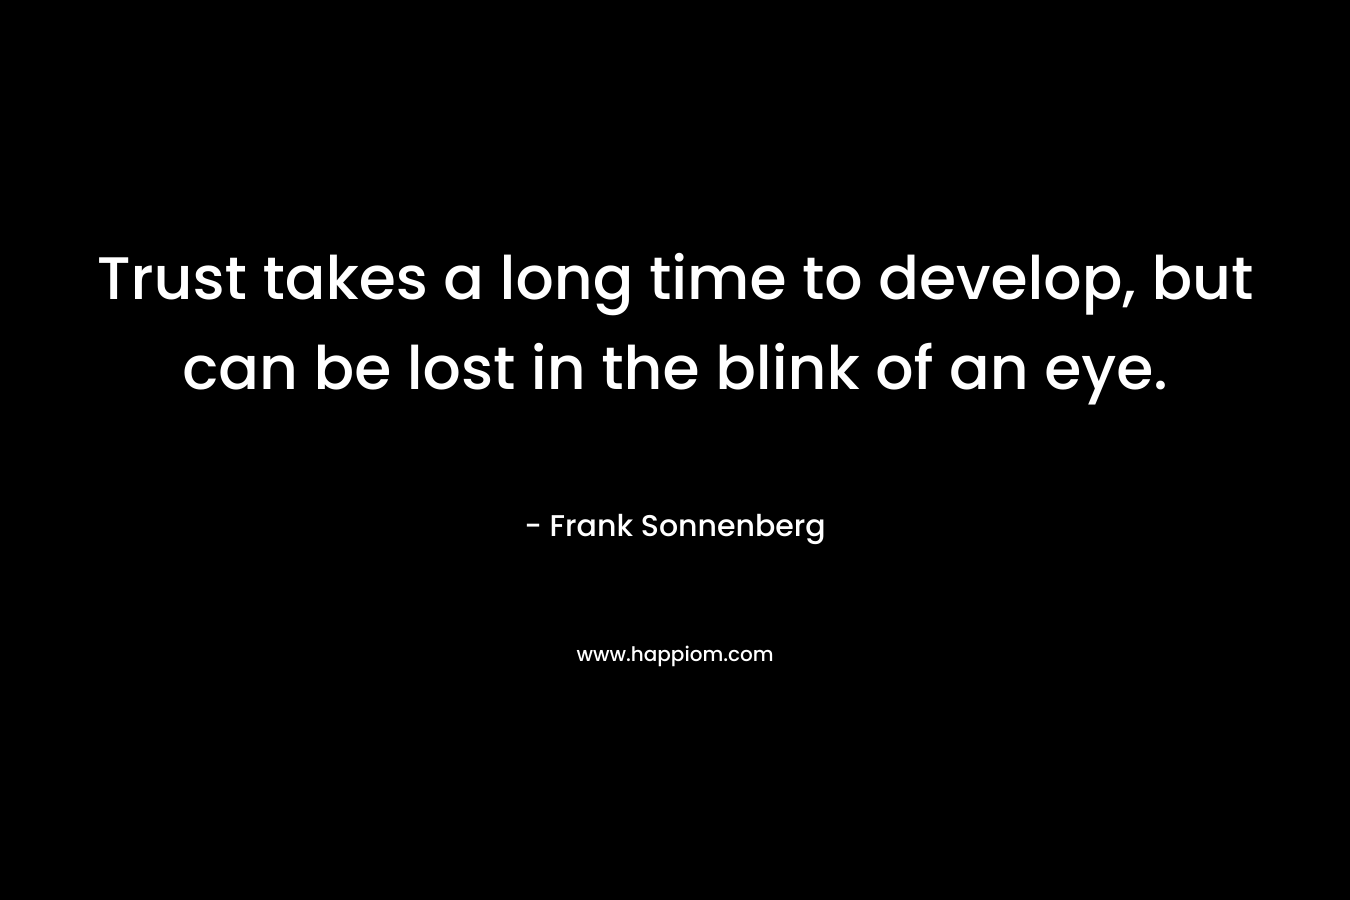 Trust takes a long time to develop, but can be lost in the blink of an eye.